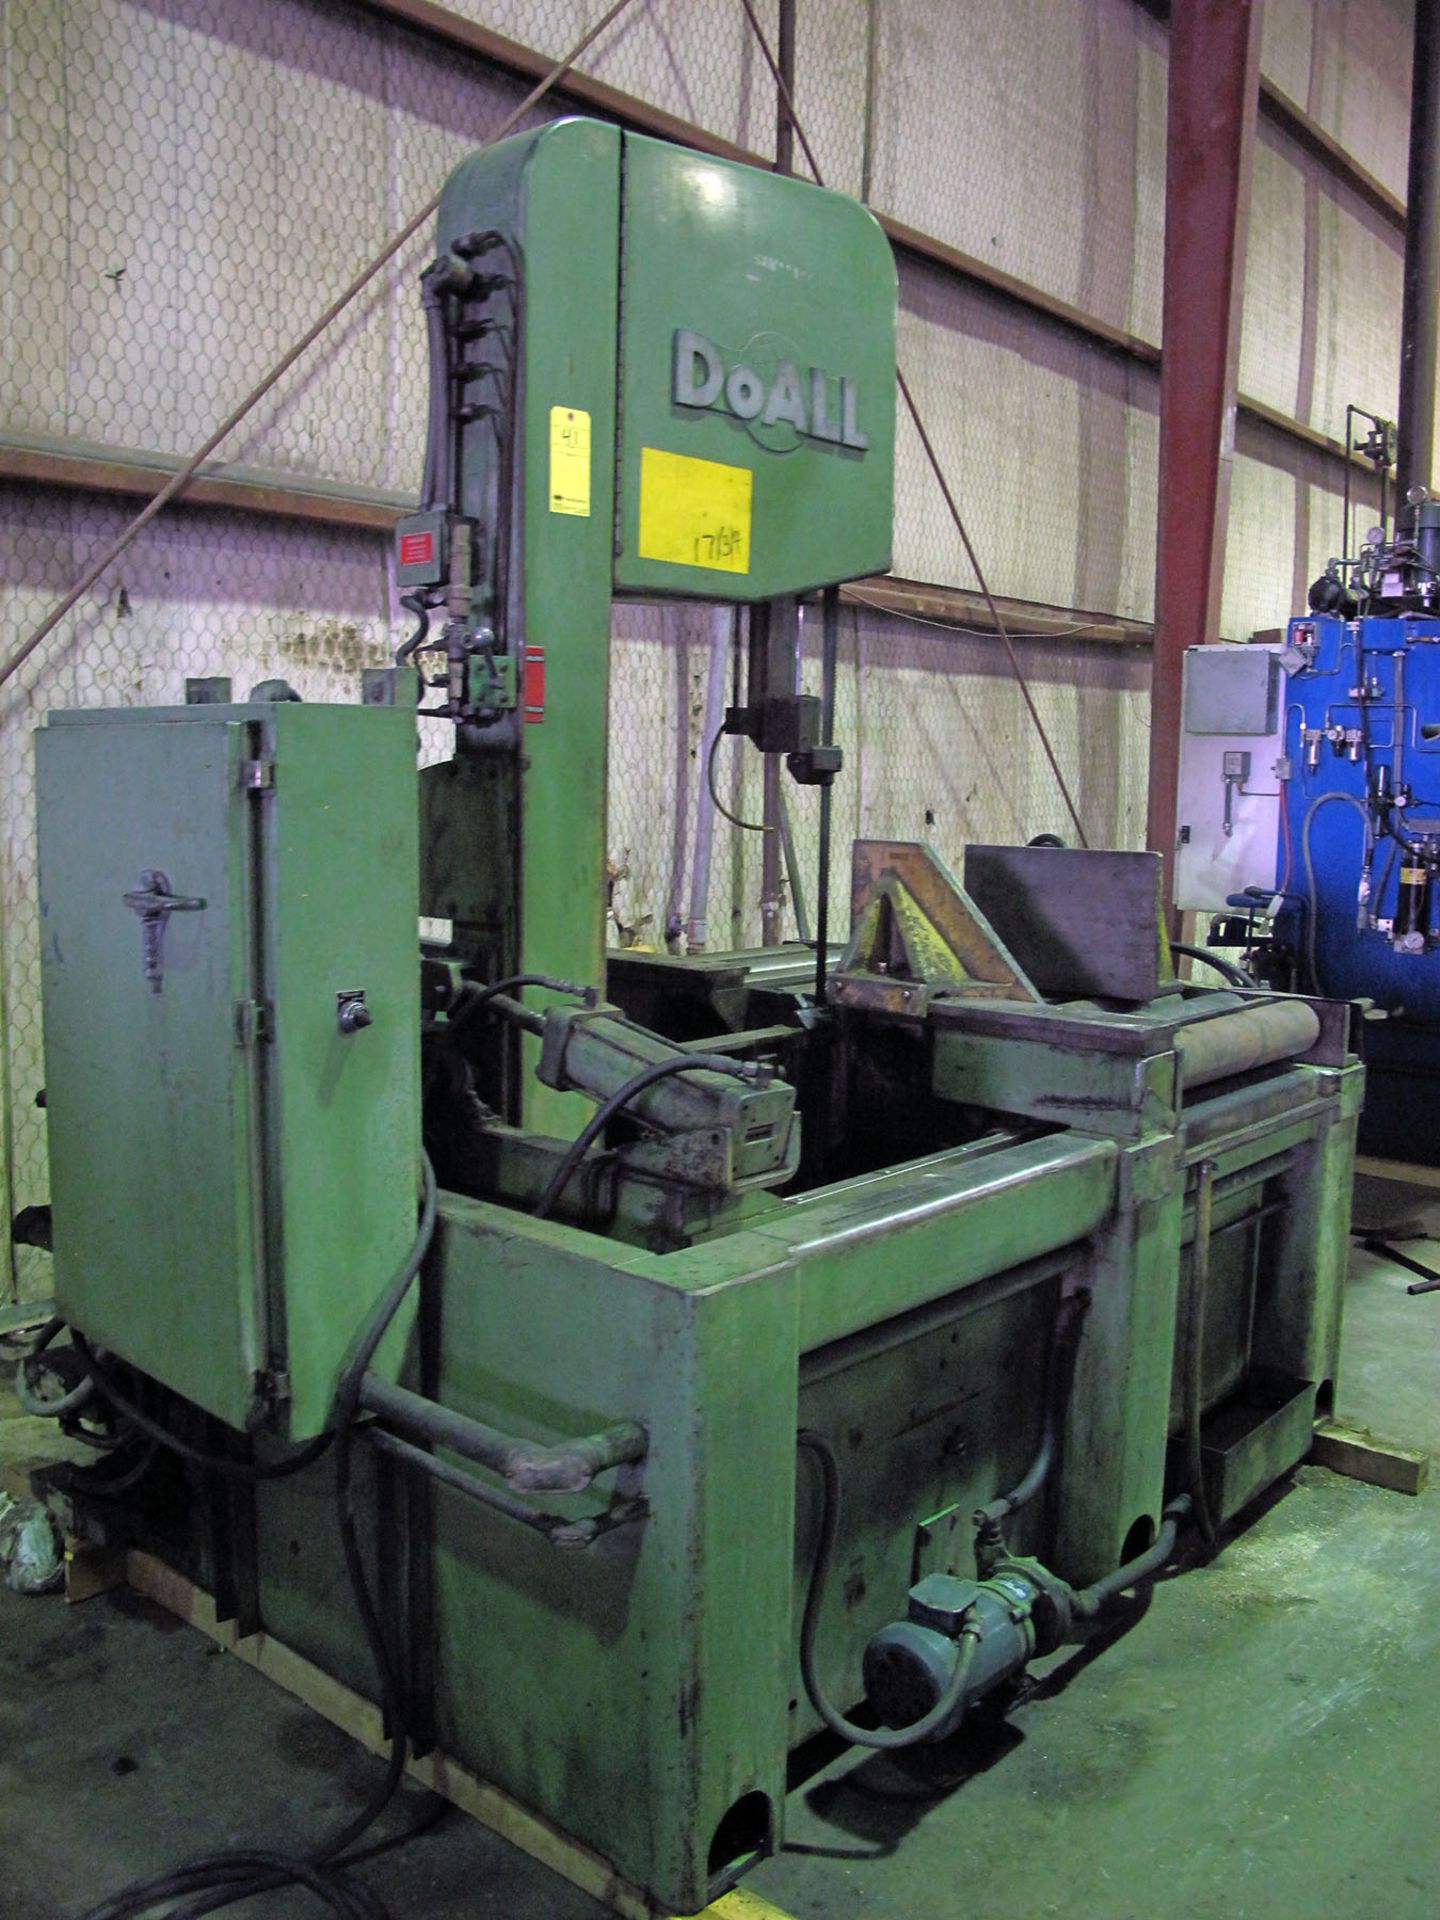 TILT FRAME SEMI-AUTOMATIC VERTICAL BANDSAW, DOALL 24" X 24", Mdl. TF24SA, 6,000 lbs. table load - Image 2 of 8